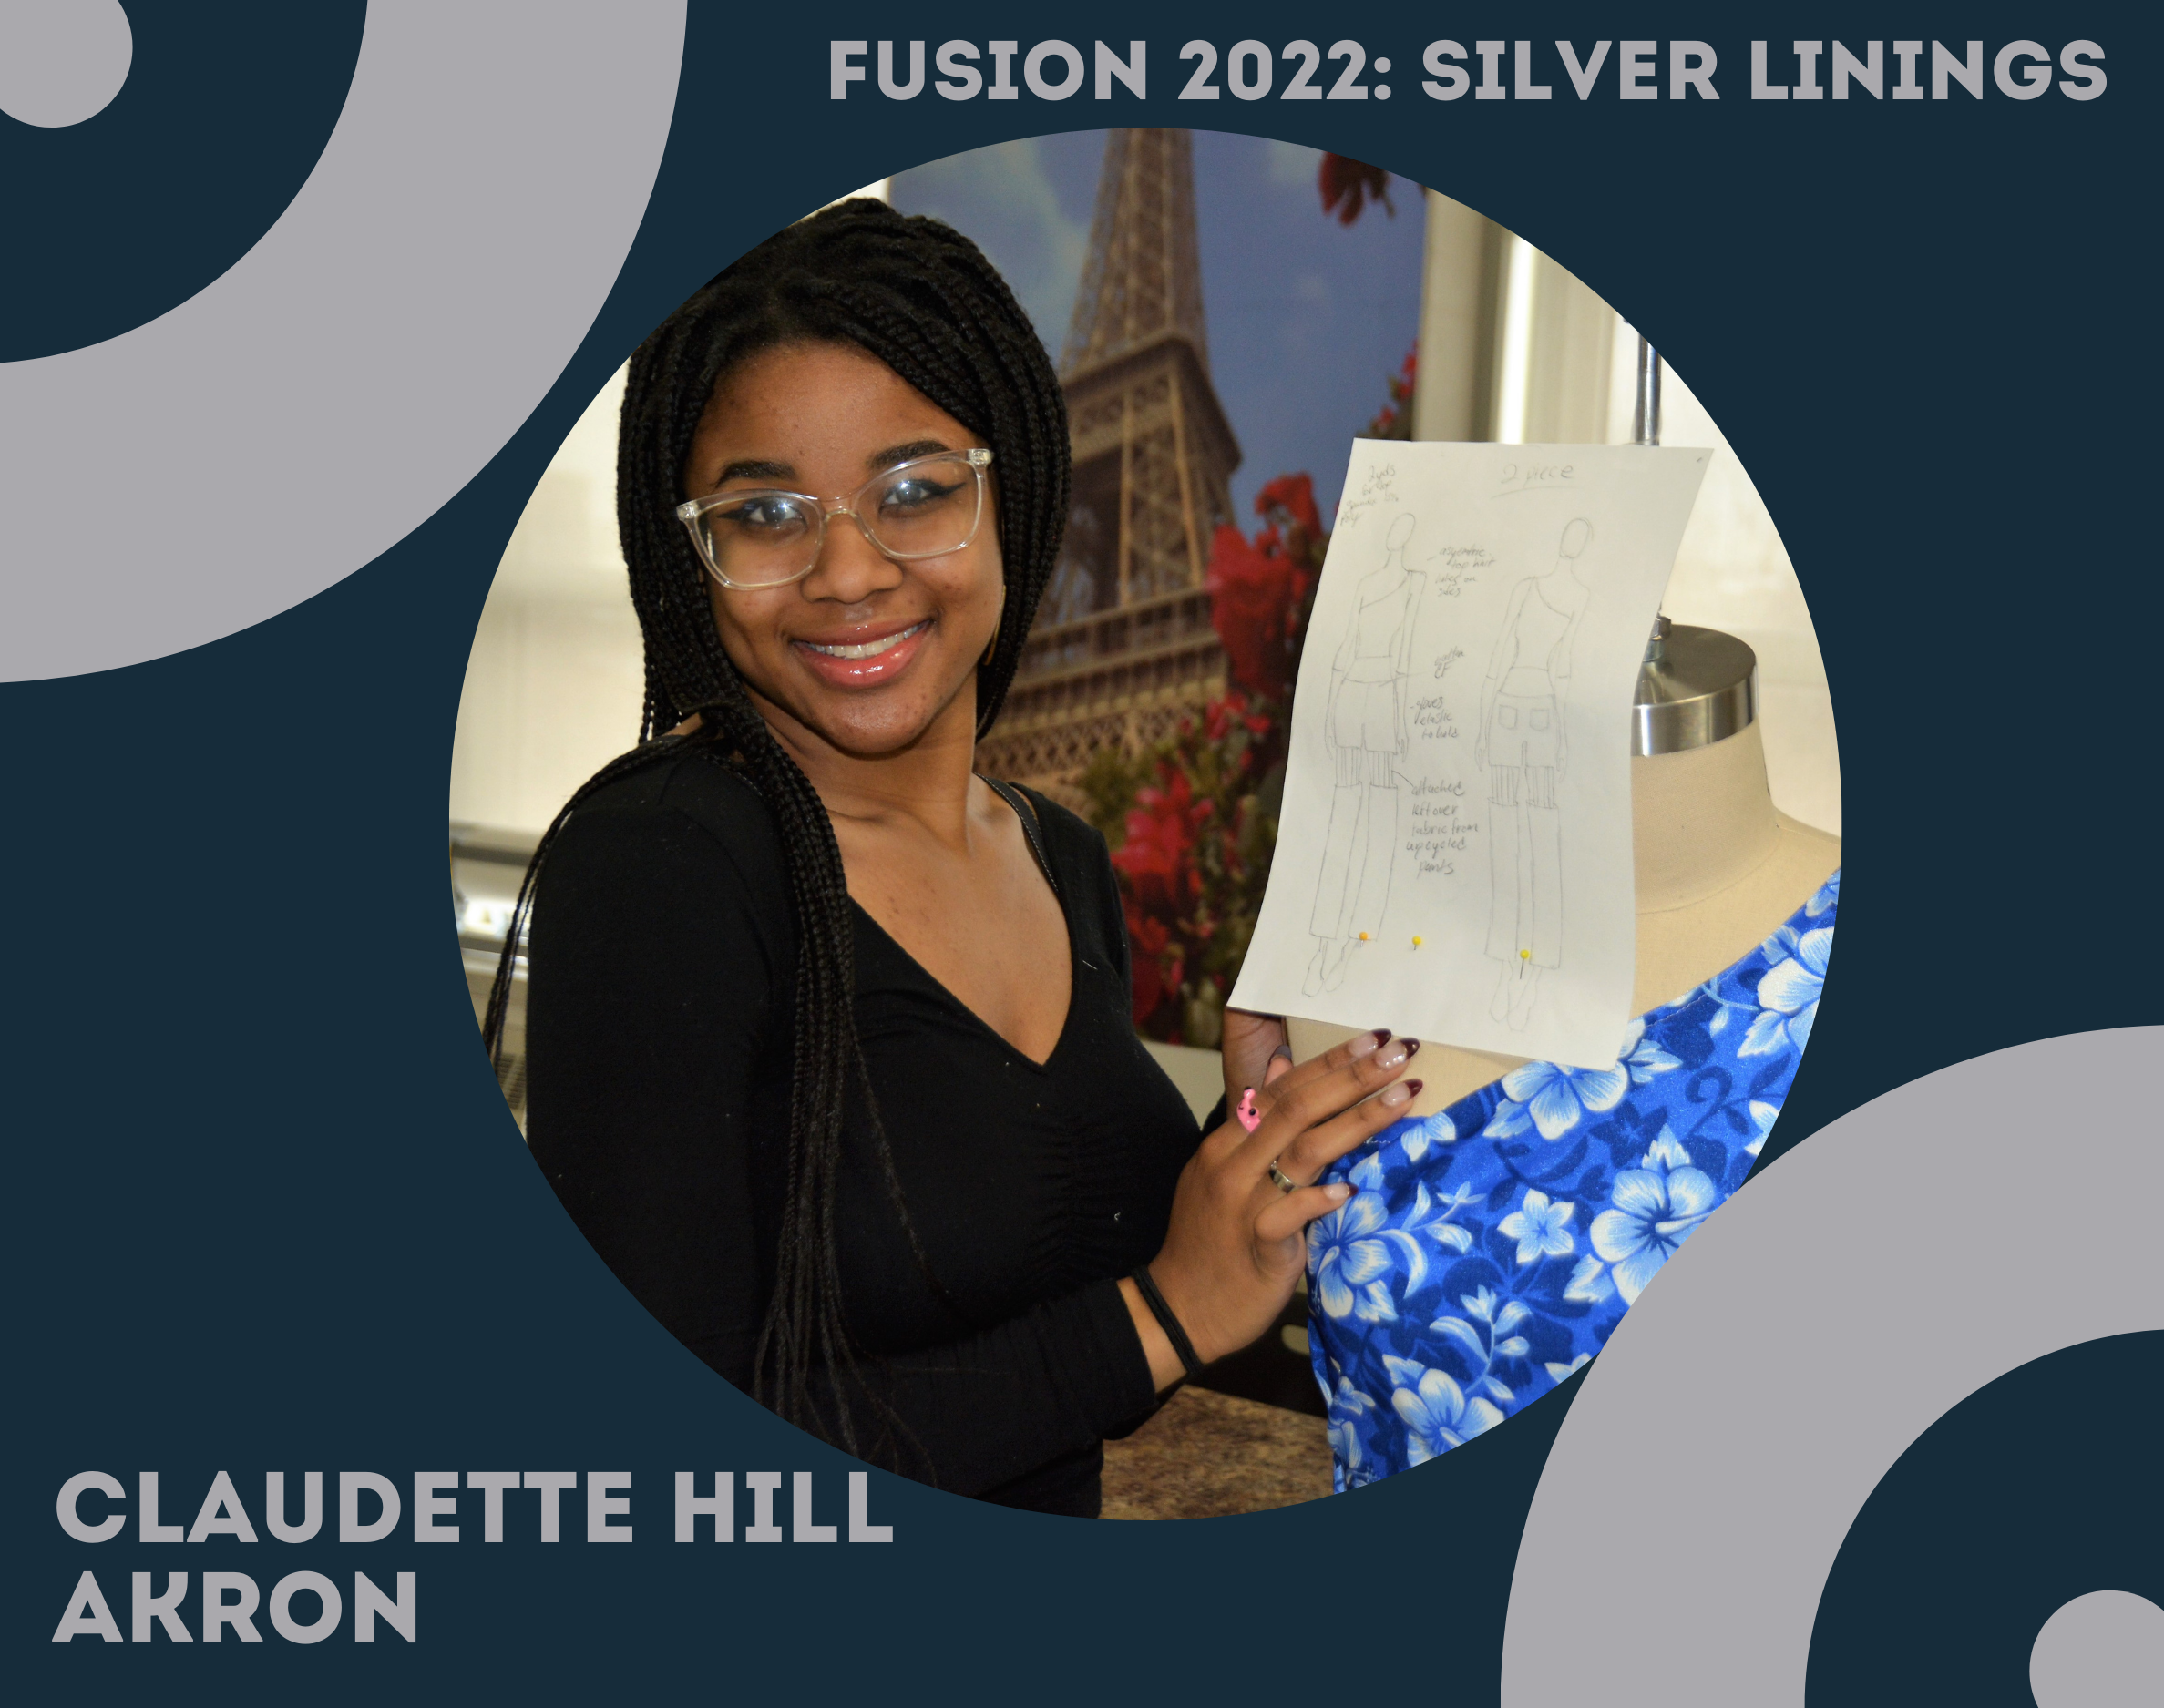 Fusion 2022: Silver Linings. Claudette Hill, Akron